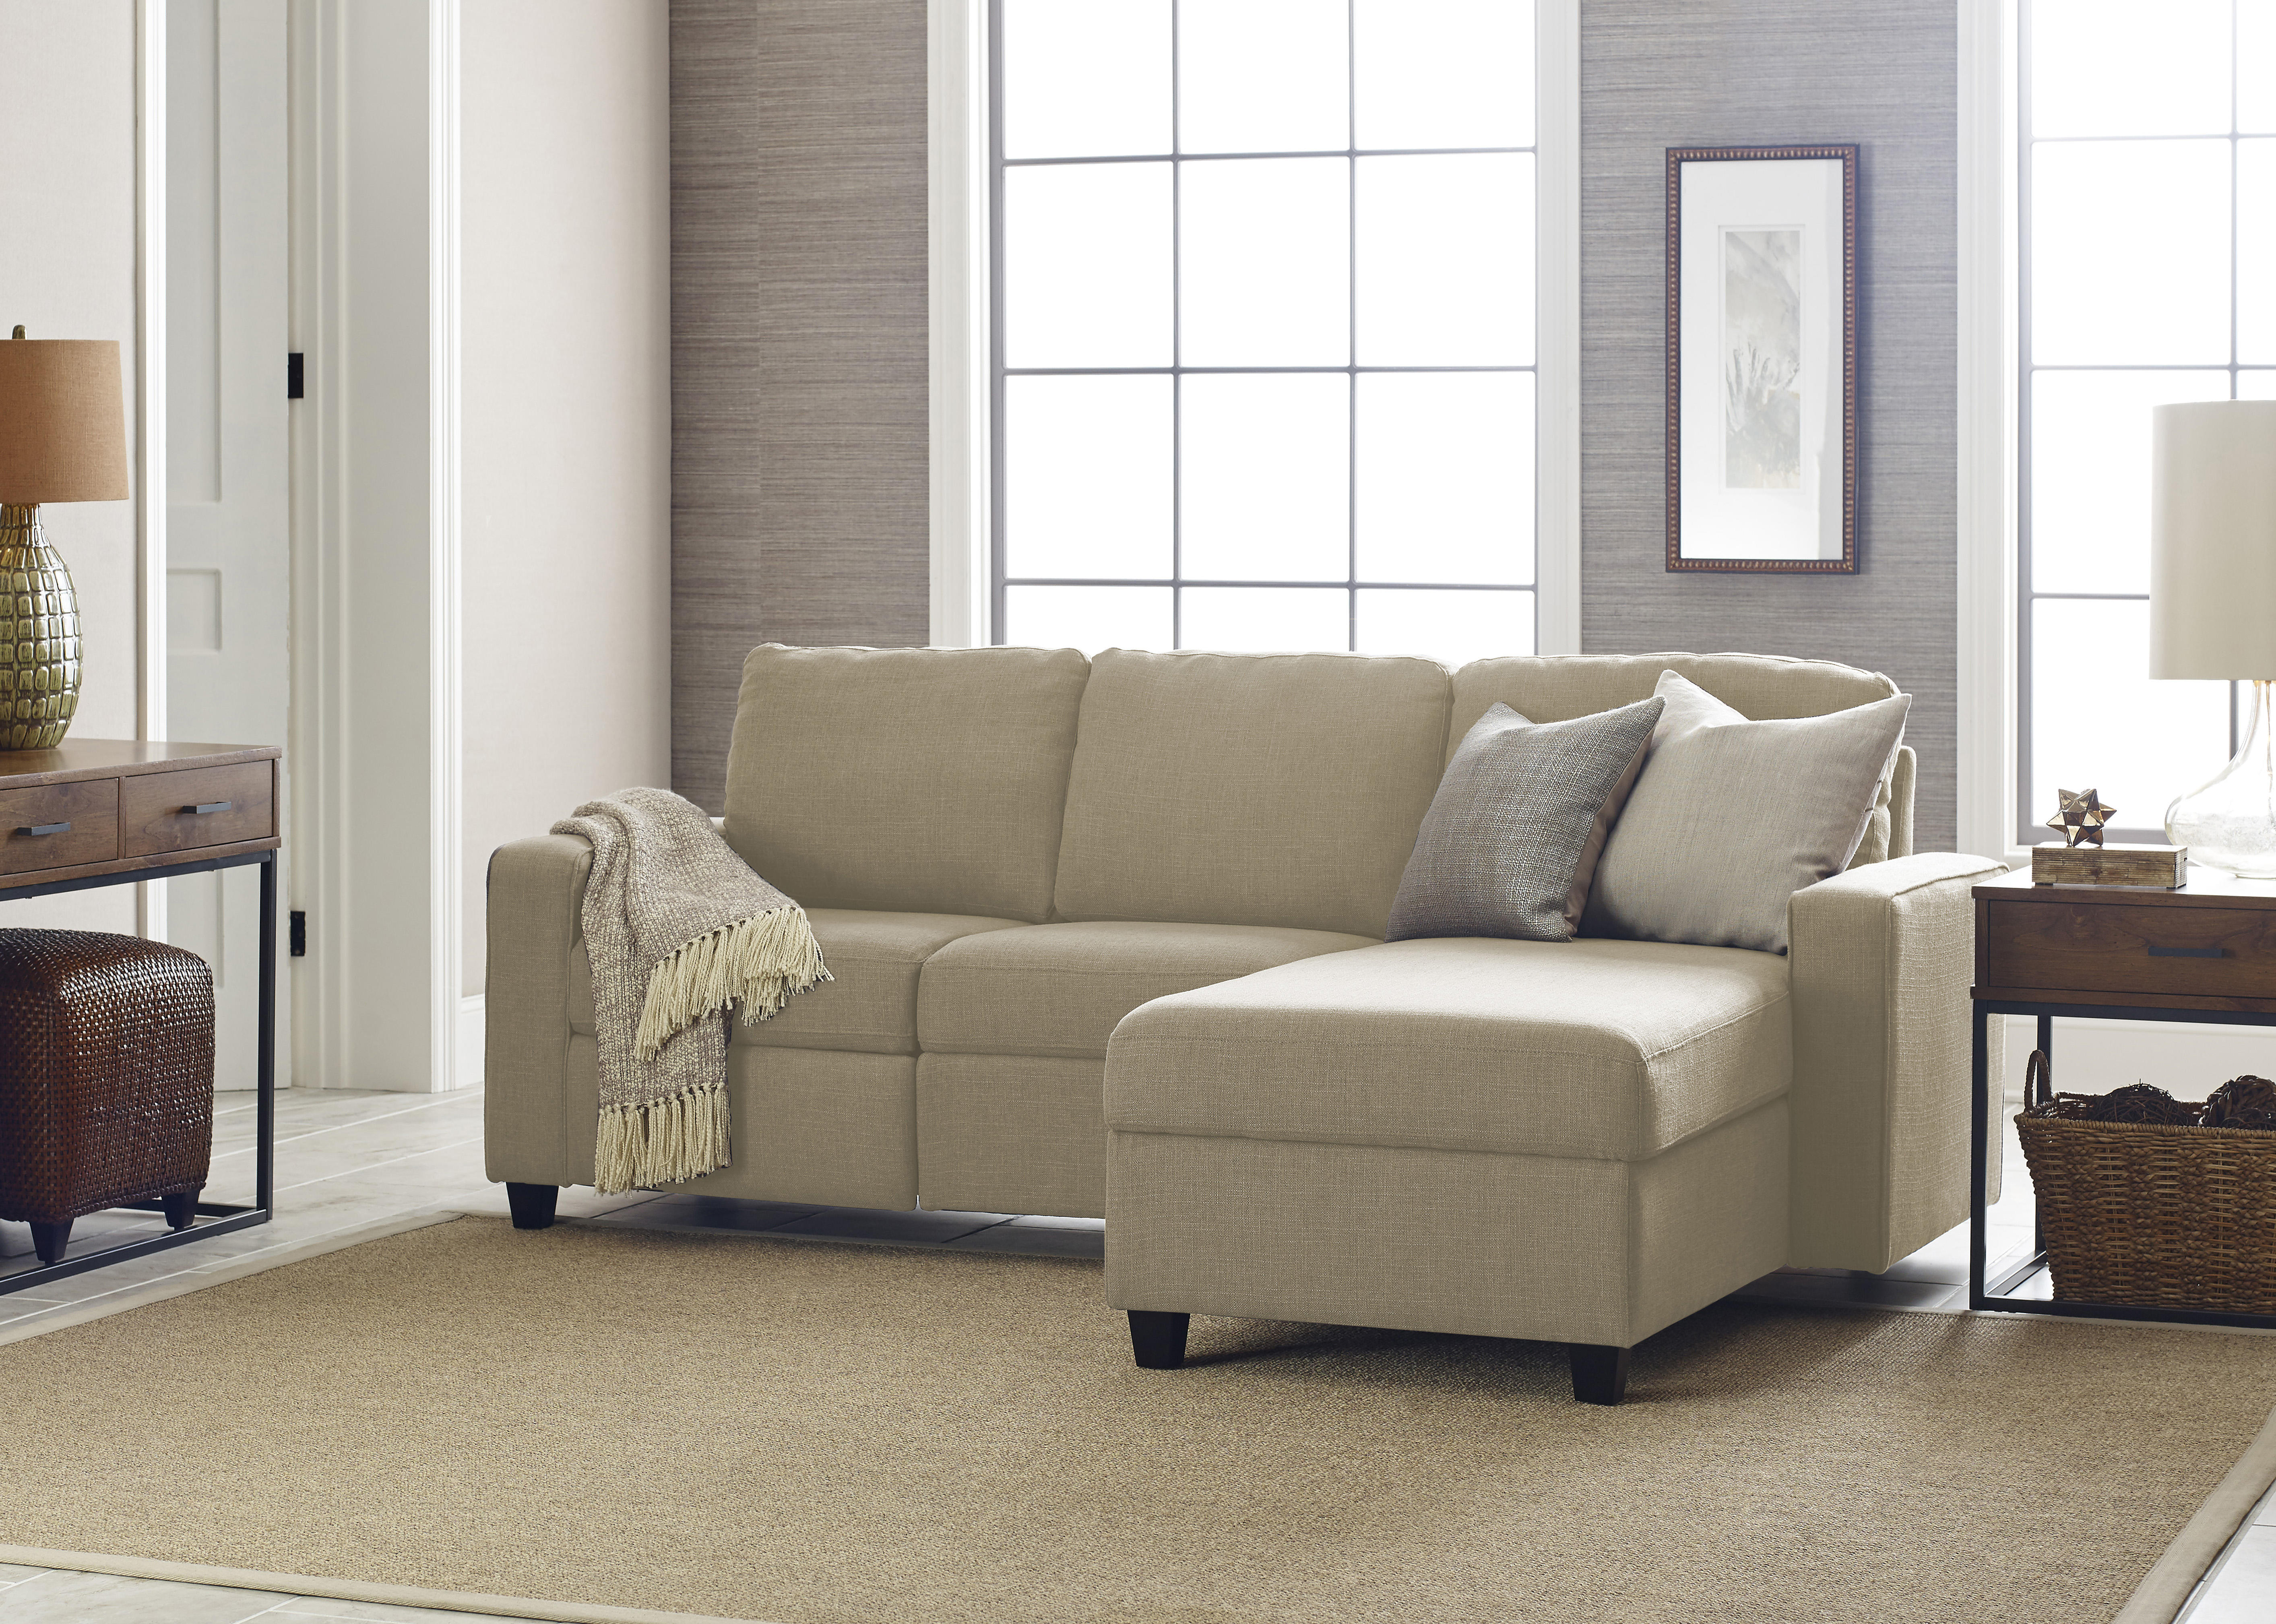 Serta Palisades Reclining Sectional with Right Storage Chaise - Oatmeal - image 4 of 9